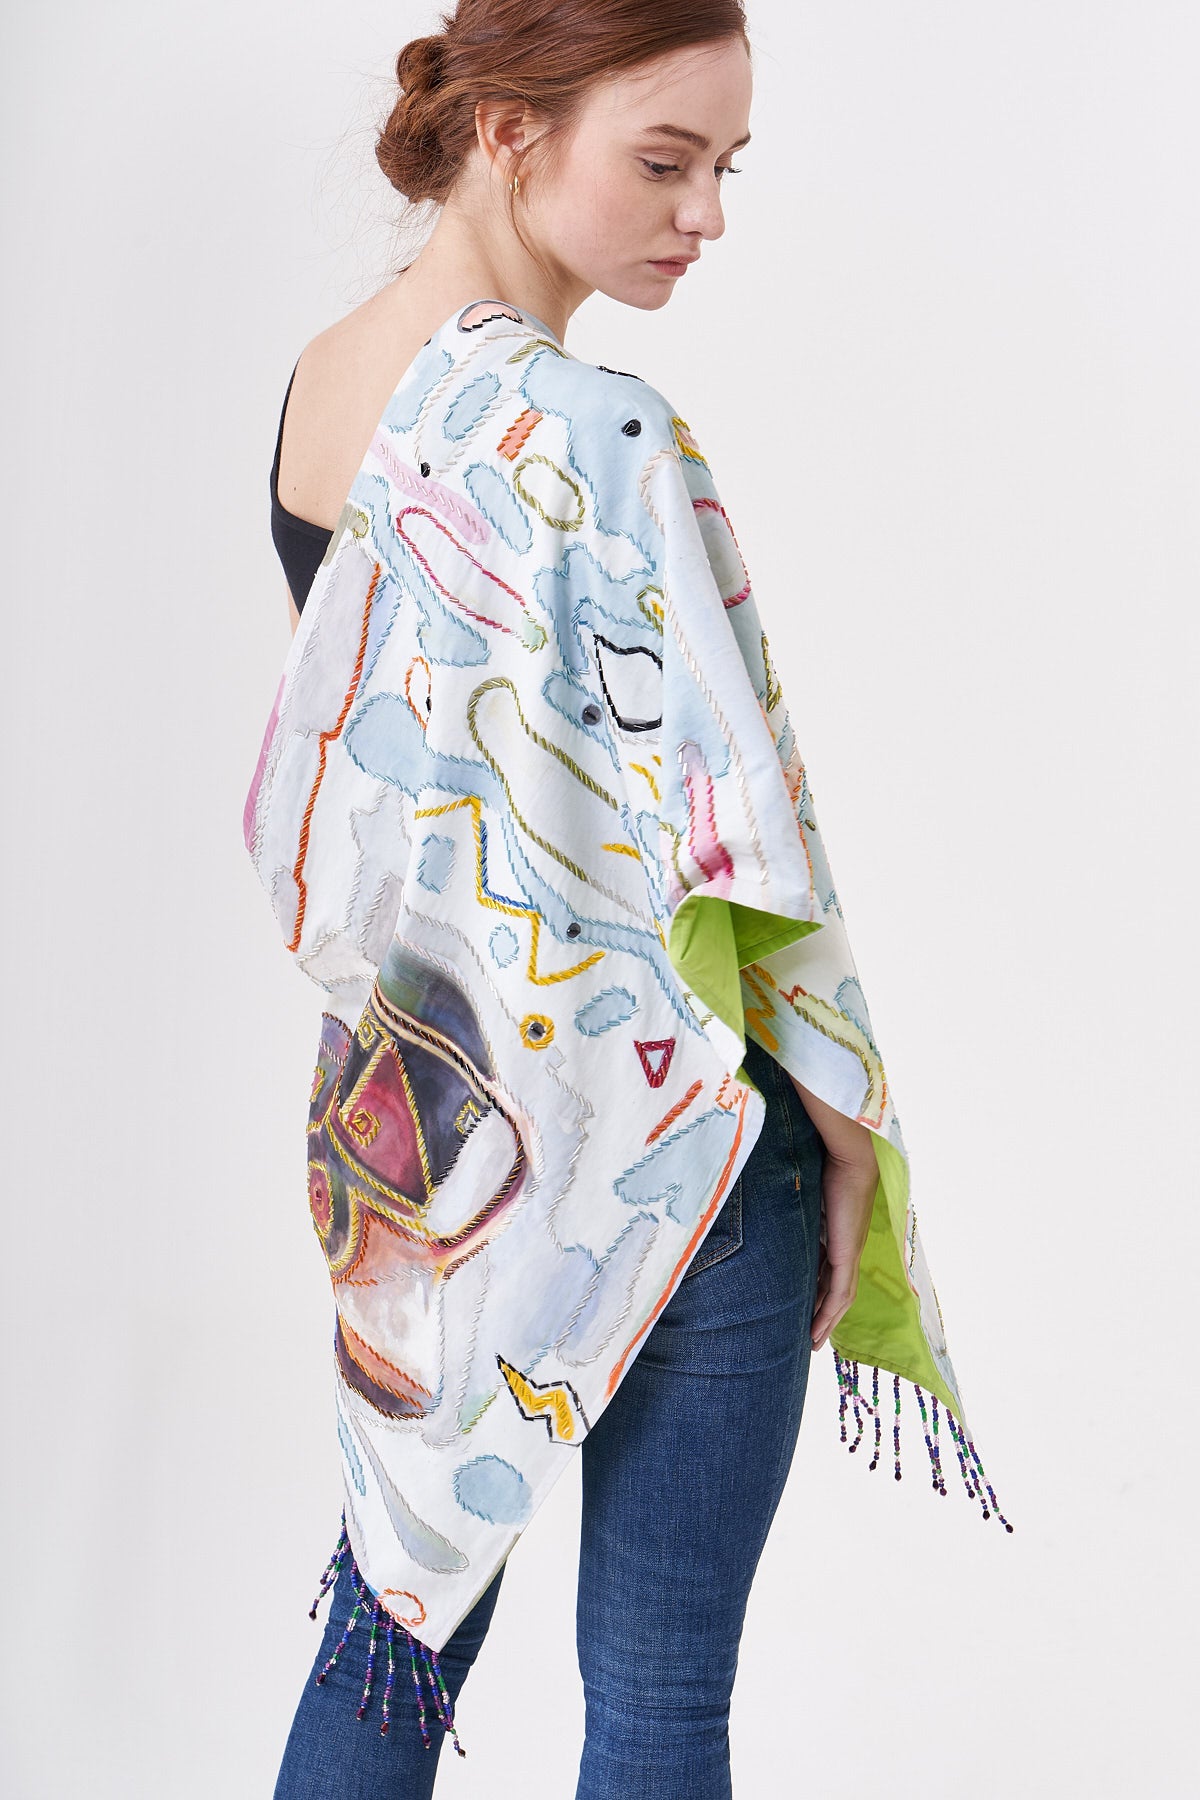 HAND-PAINTED AND HAND-EMBROIDERED SHAWL WITH BEADED FRINGE - ZAPOTECA CERAMIC